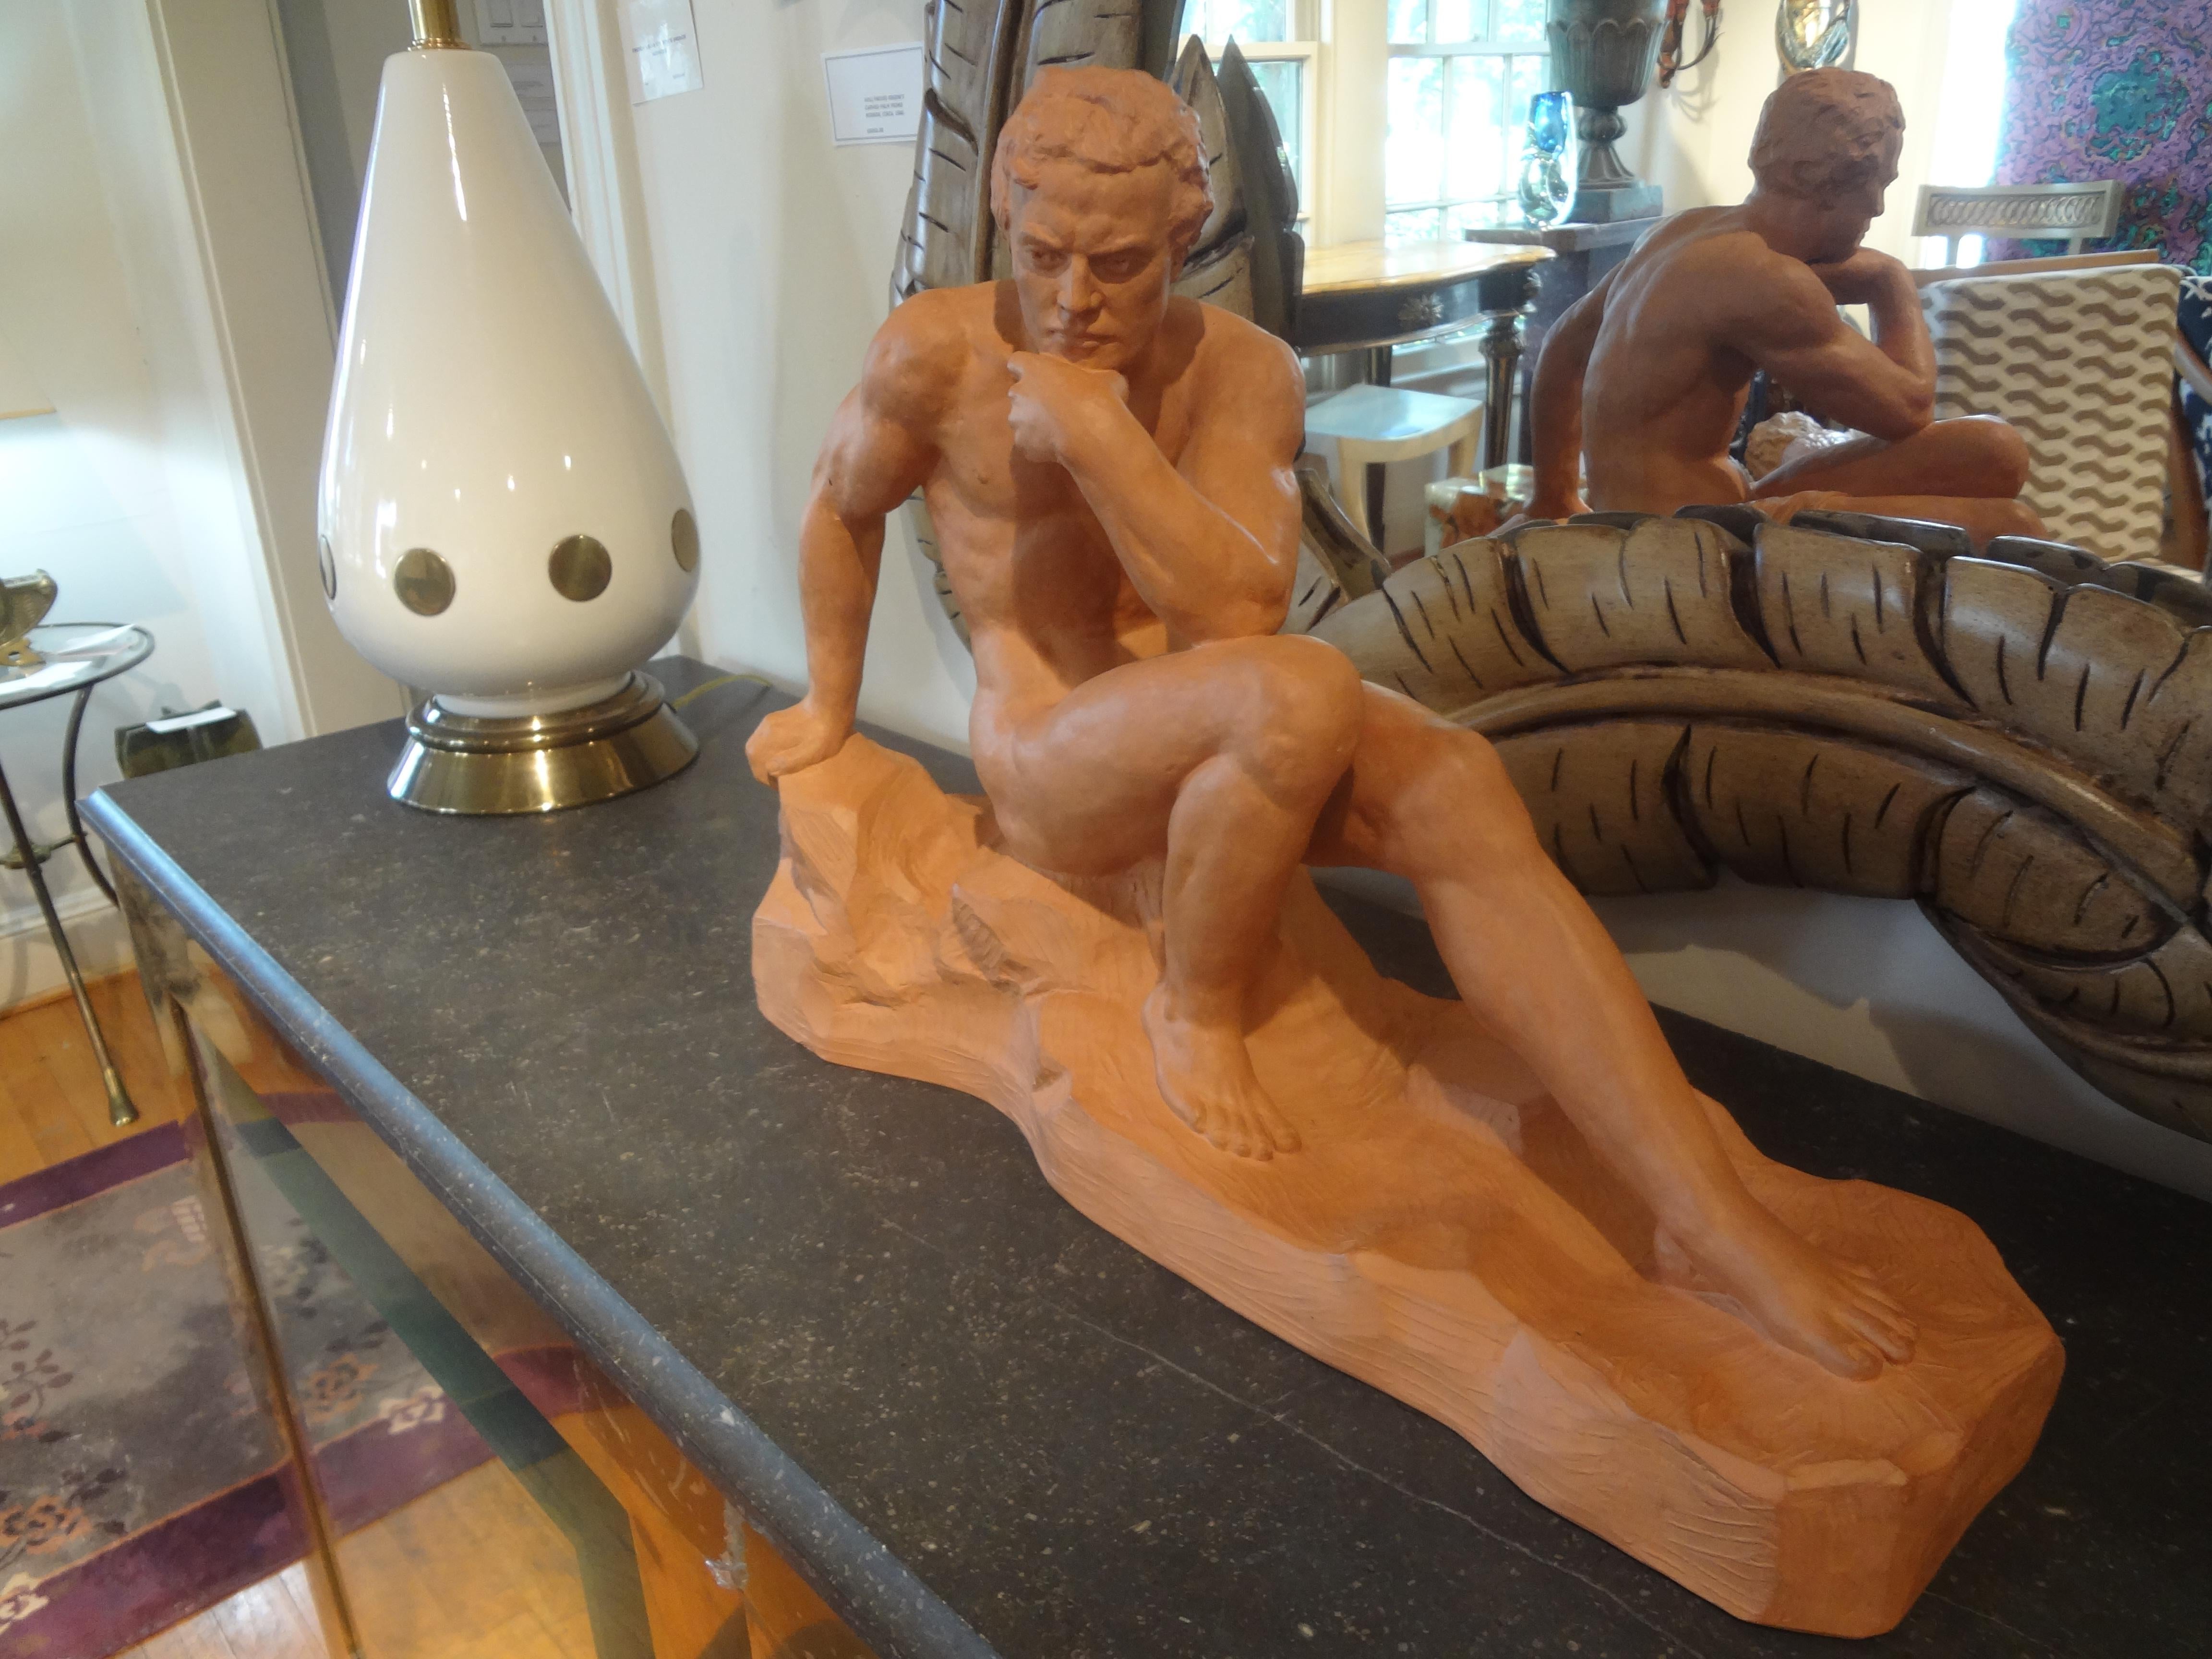 French Art Deco terracotta sculpture signed Ouline. This stunning French Art Deco terra cotta sculpture of a nude male is expertly executed with beautiful detailing by Alexandre Ouline. This is one of the best examples of his work that we have ever